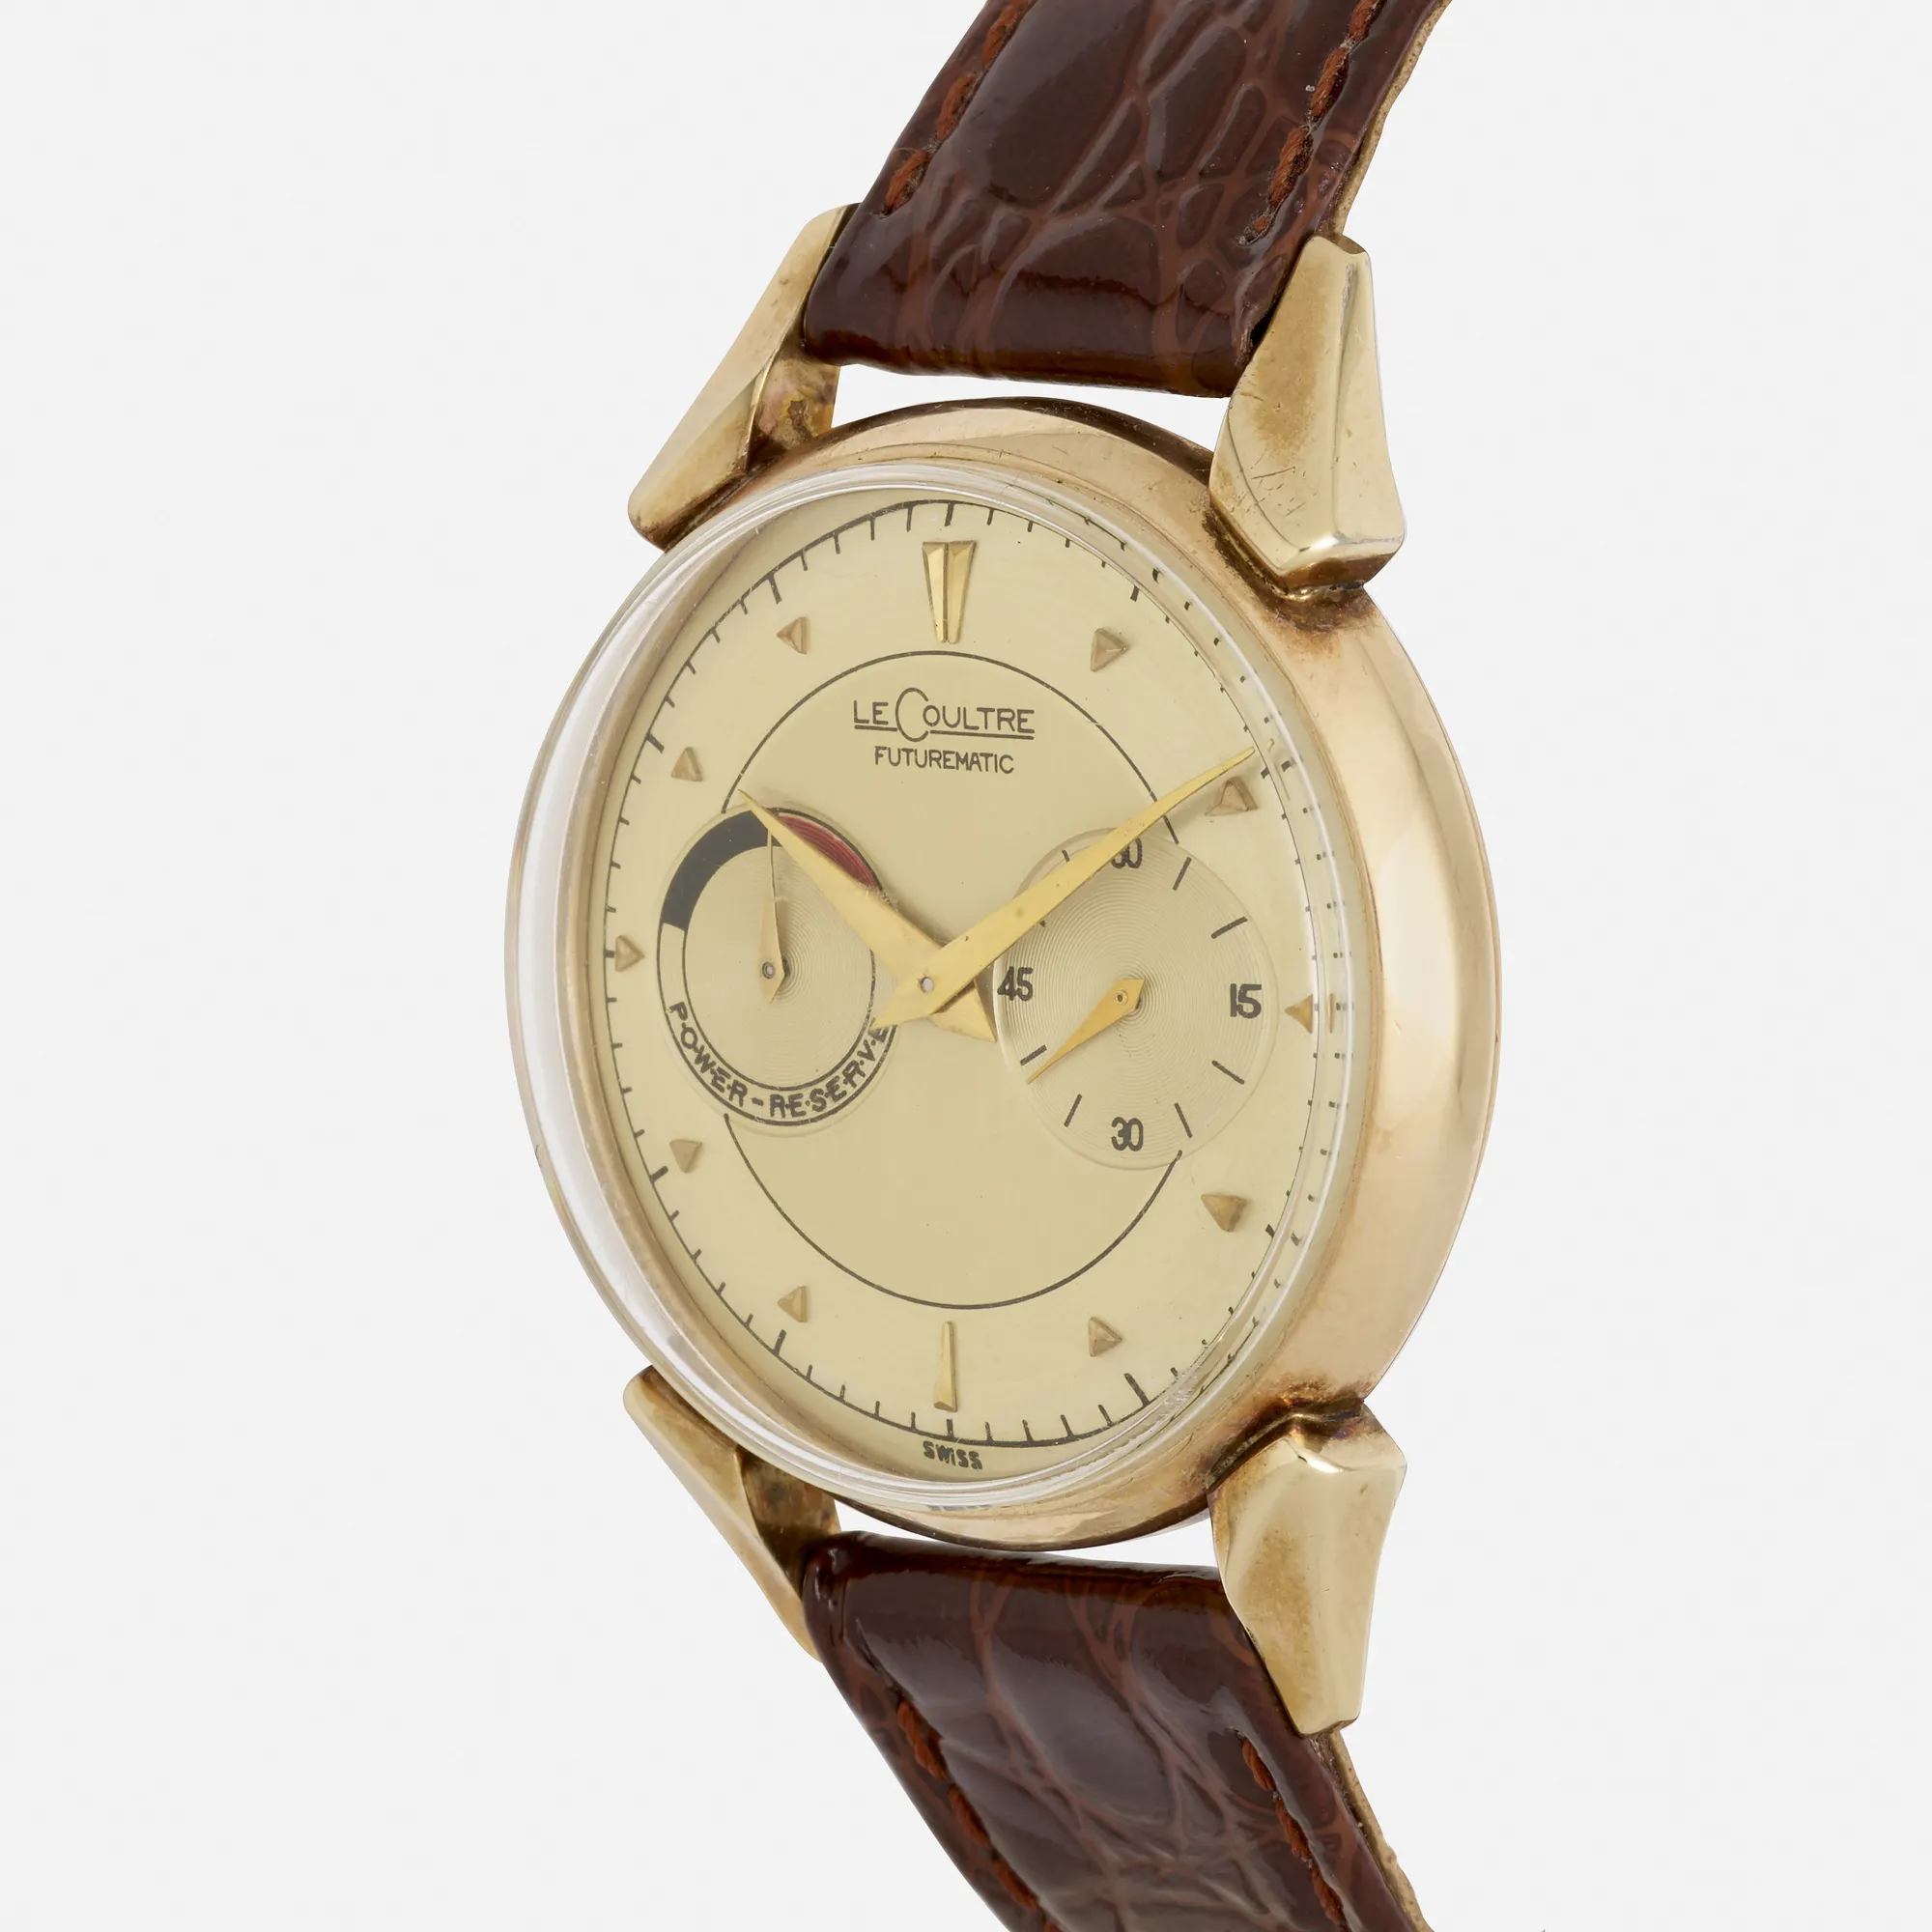 Jaeger-LeCoultre Futurematic 44mm Yellow gold and stainless steel Champagne 1